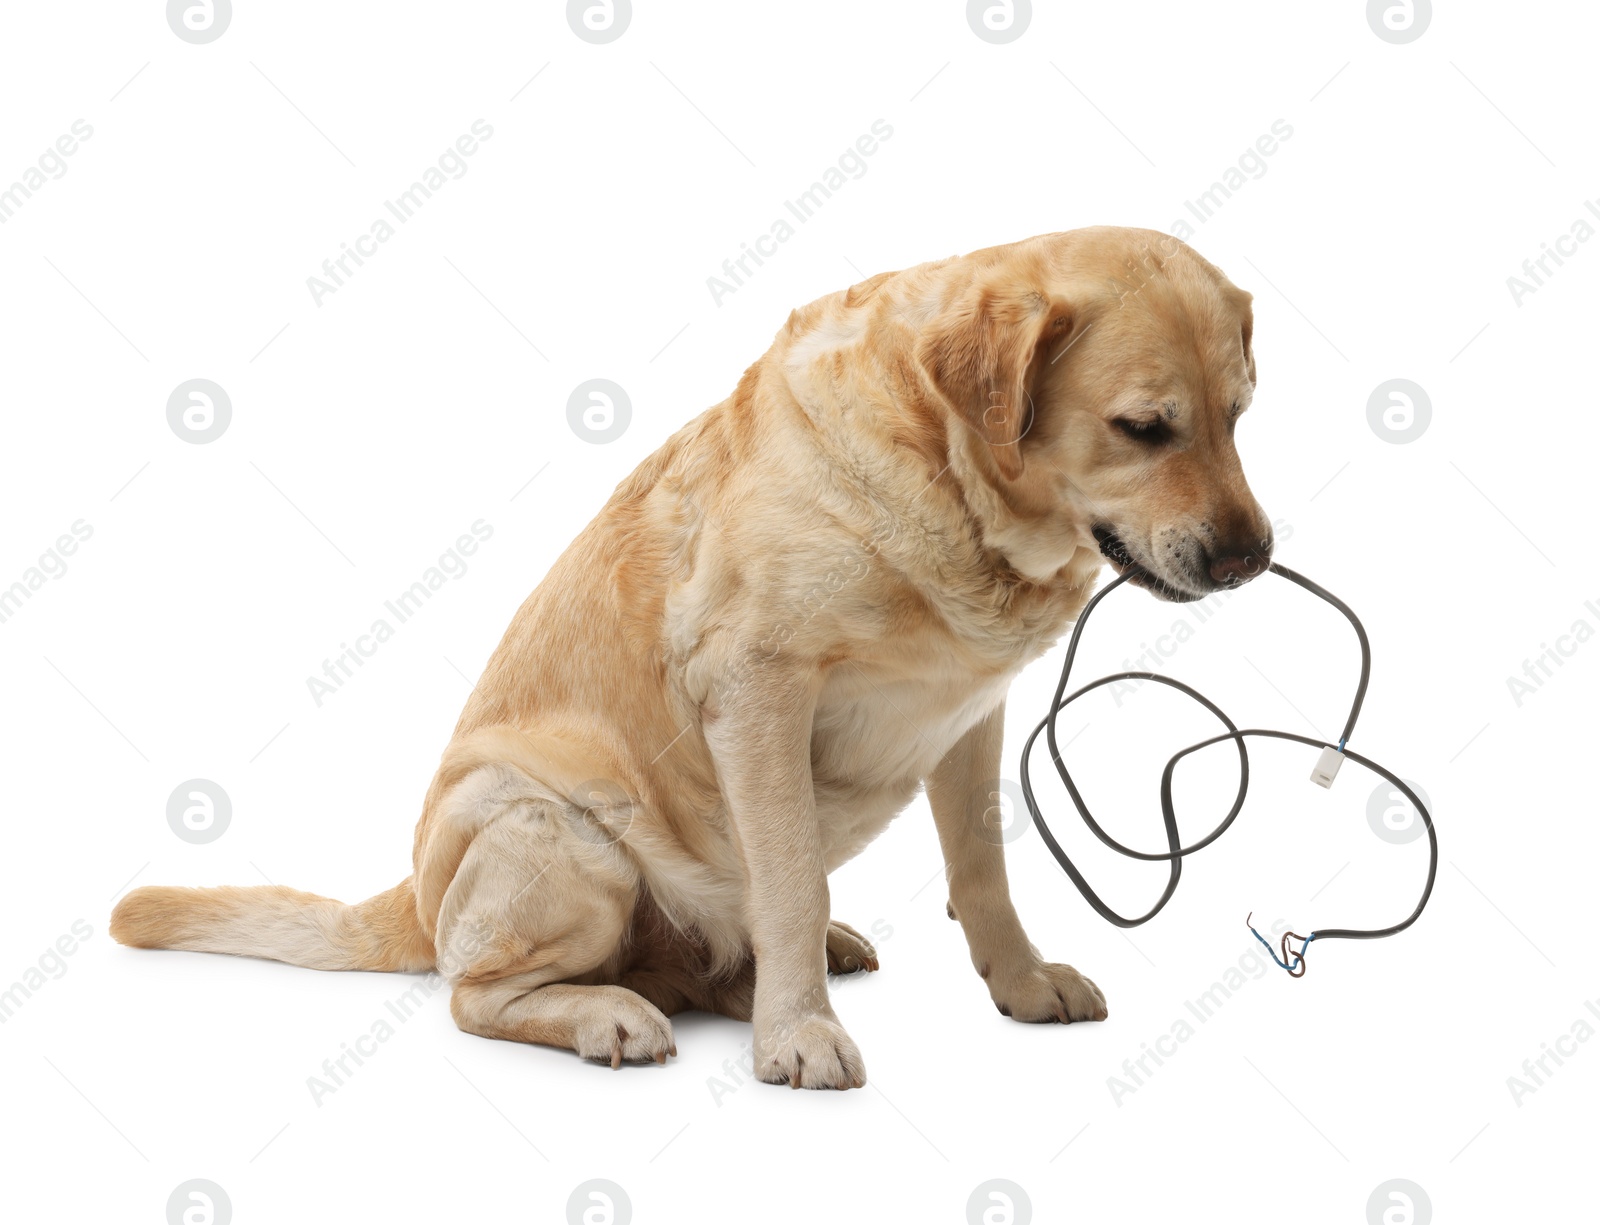 Photo of Naughty Labrador Retriever dog chewing damaged electrical wire on white background